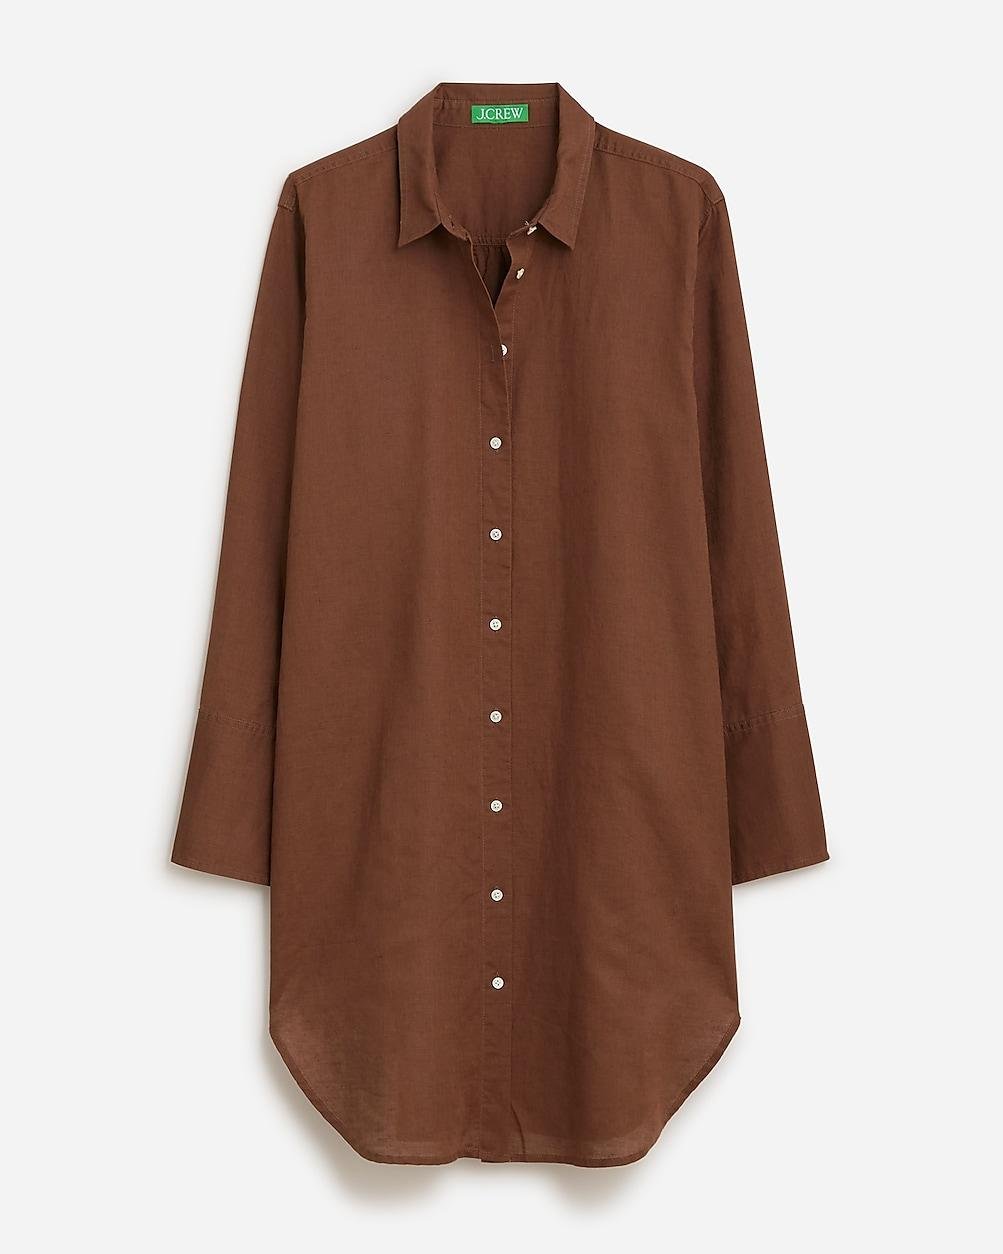 Relaxed-fit beach shirt in linen-cotton blend by J.CREW